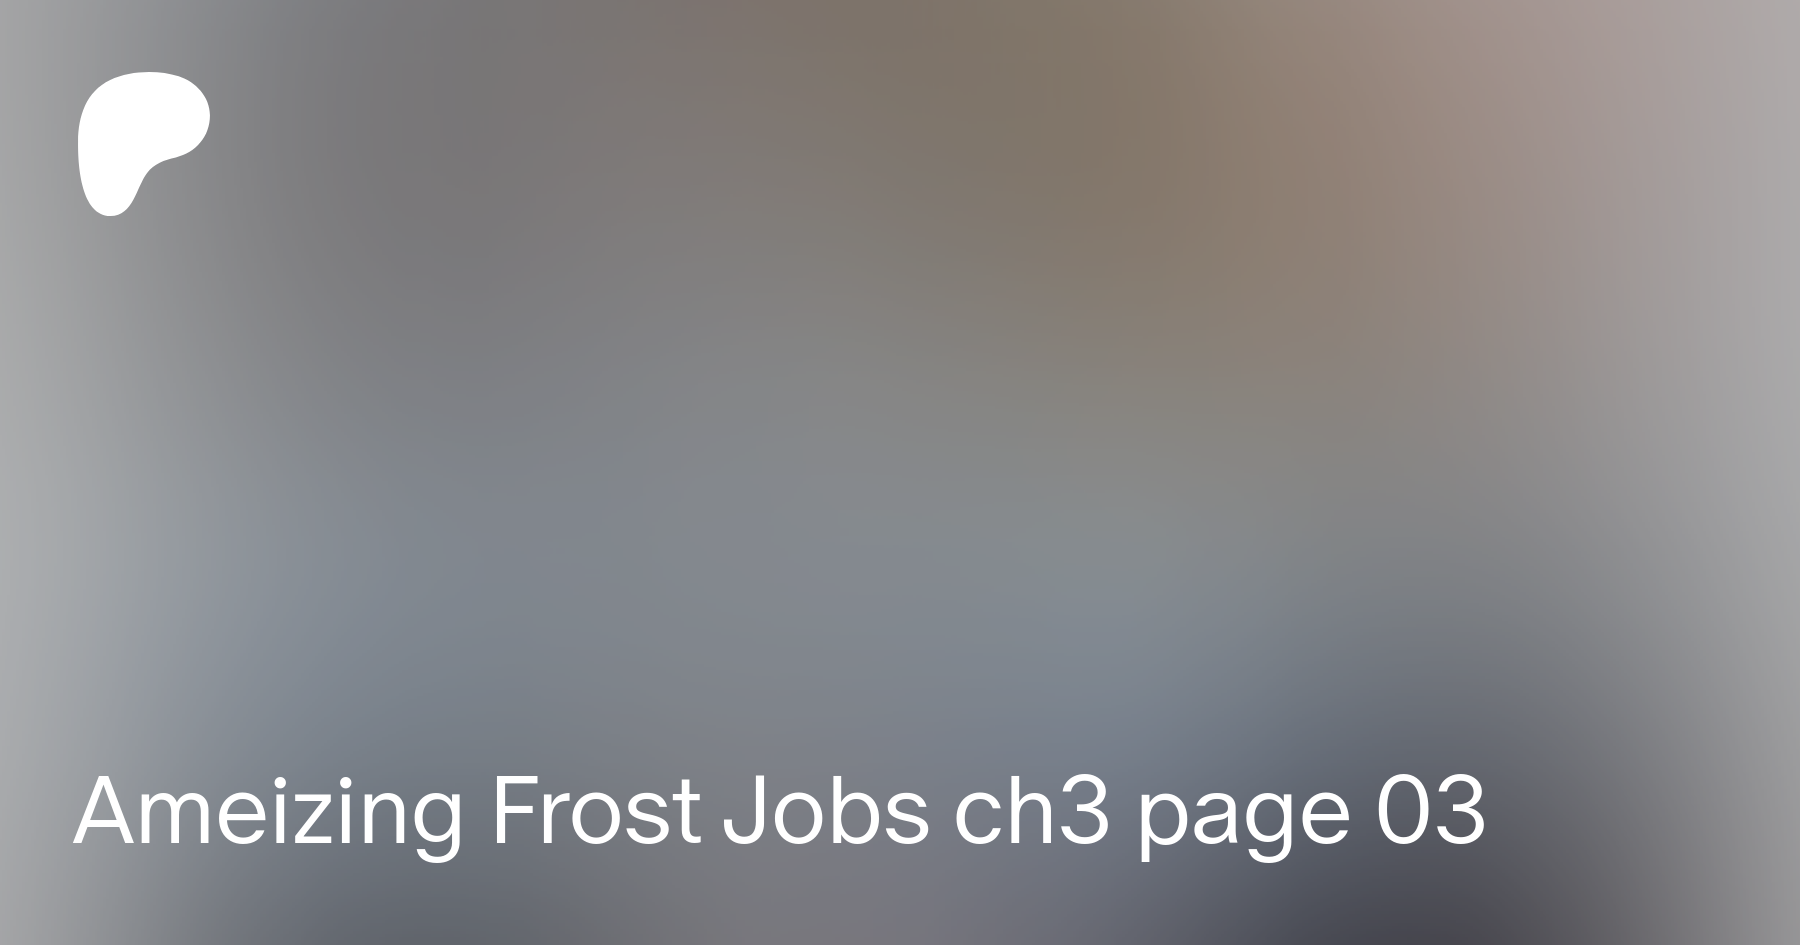 Ameizing frost jobs